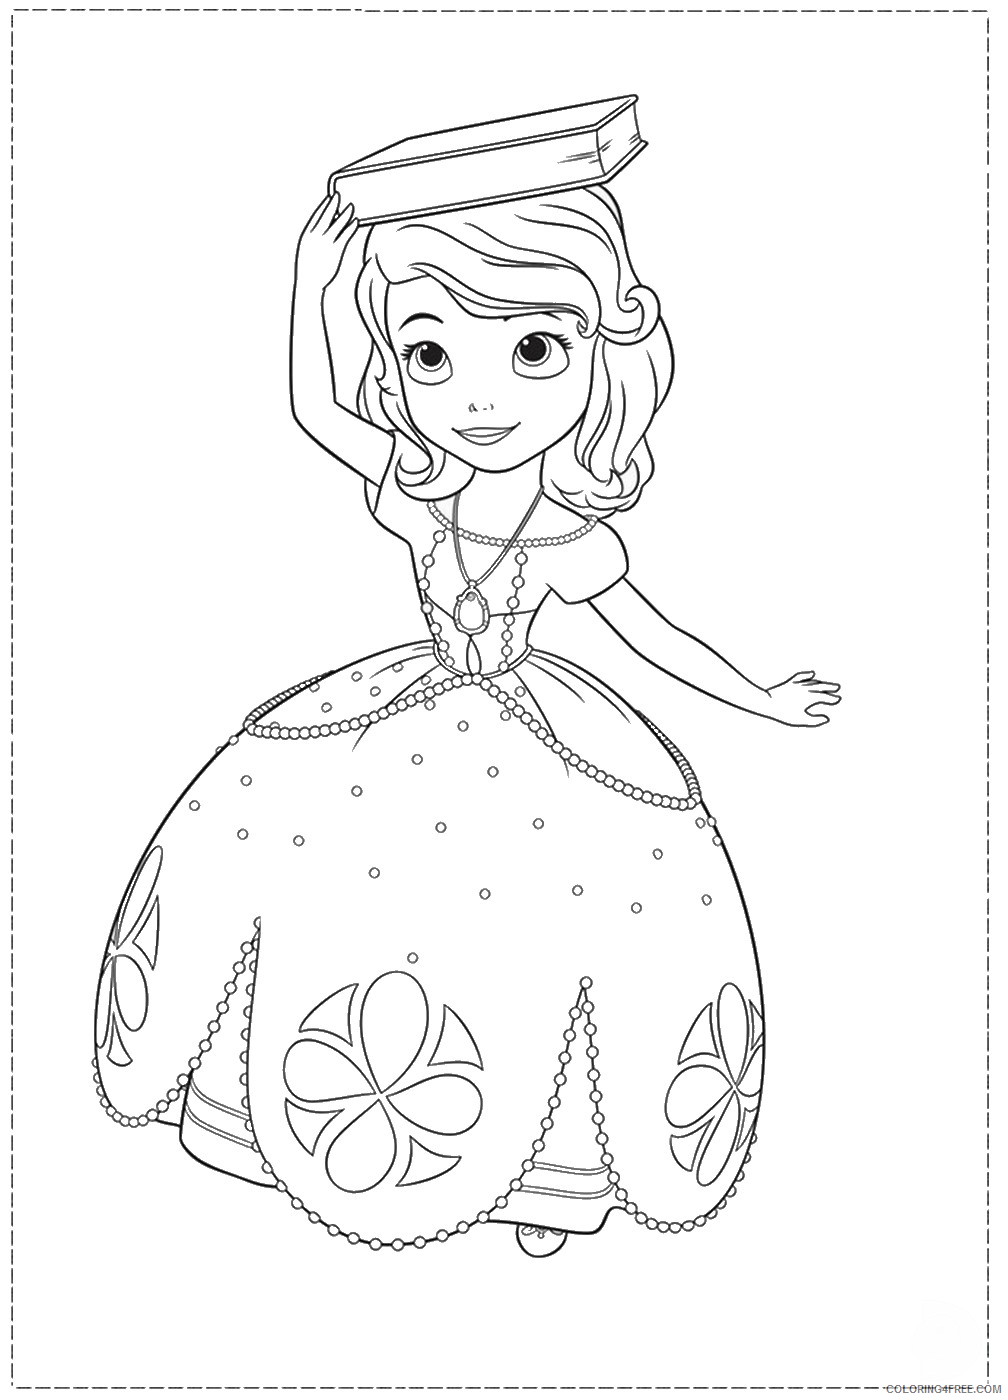 Sofia the First Coloring Pages Cartoons Sofia_the_First_coloring_20 Printable 2020 5850 Coloring4free